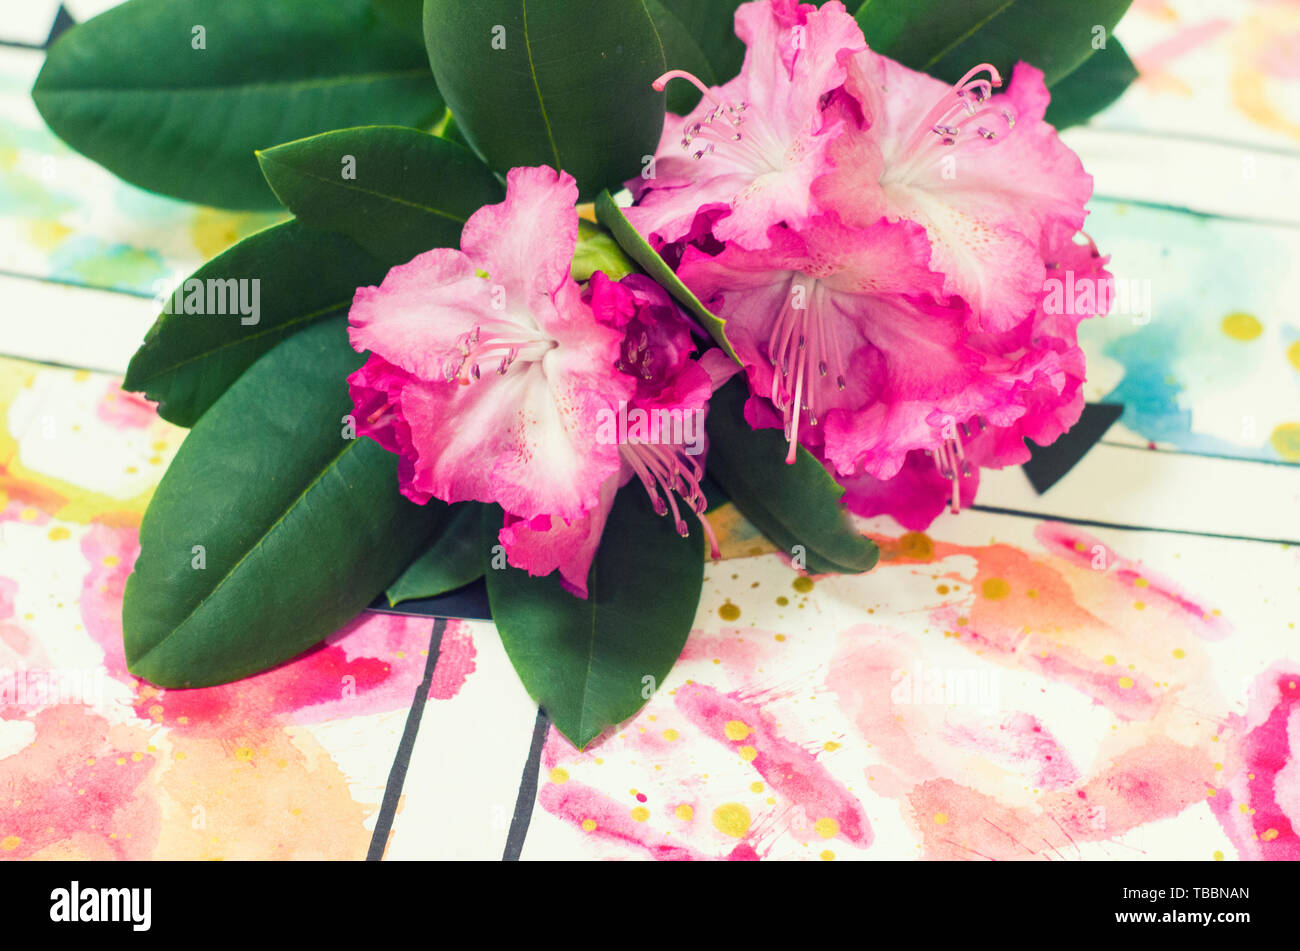 Branch of azaleas on a picturesque background. Flower photo. Stock Photo